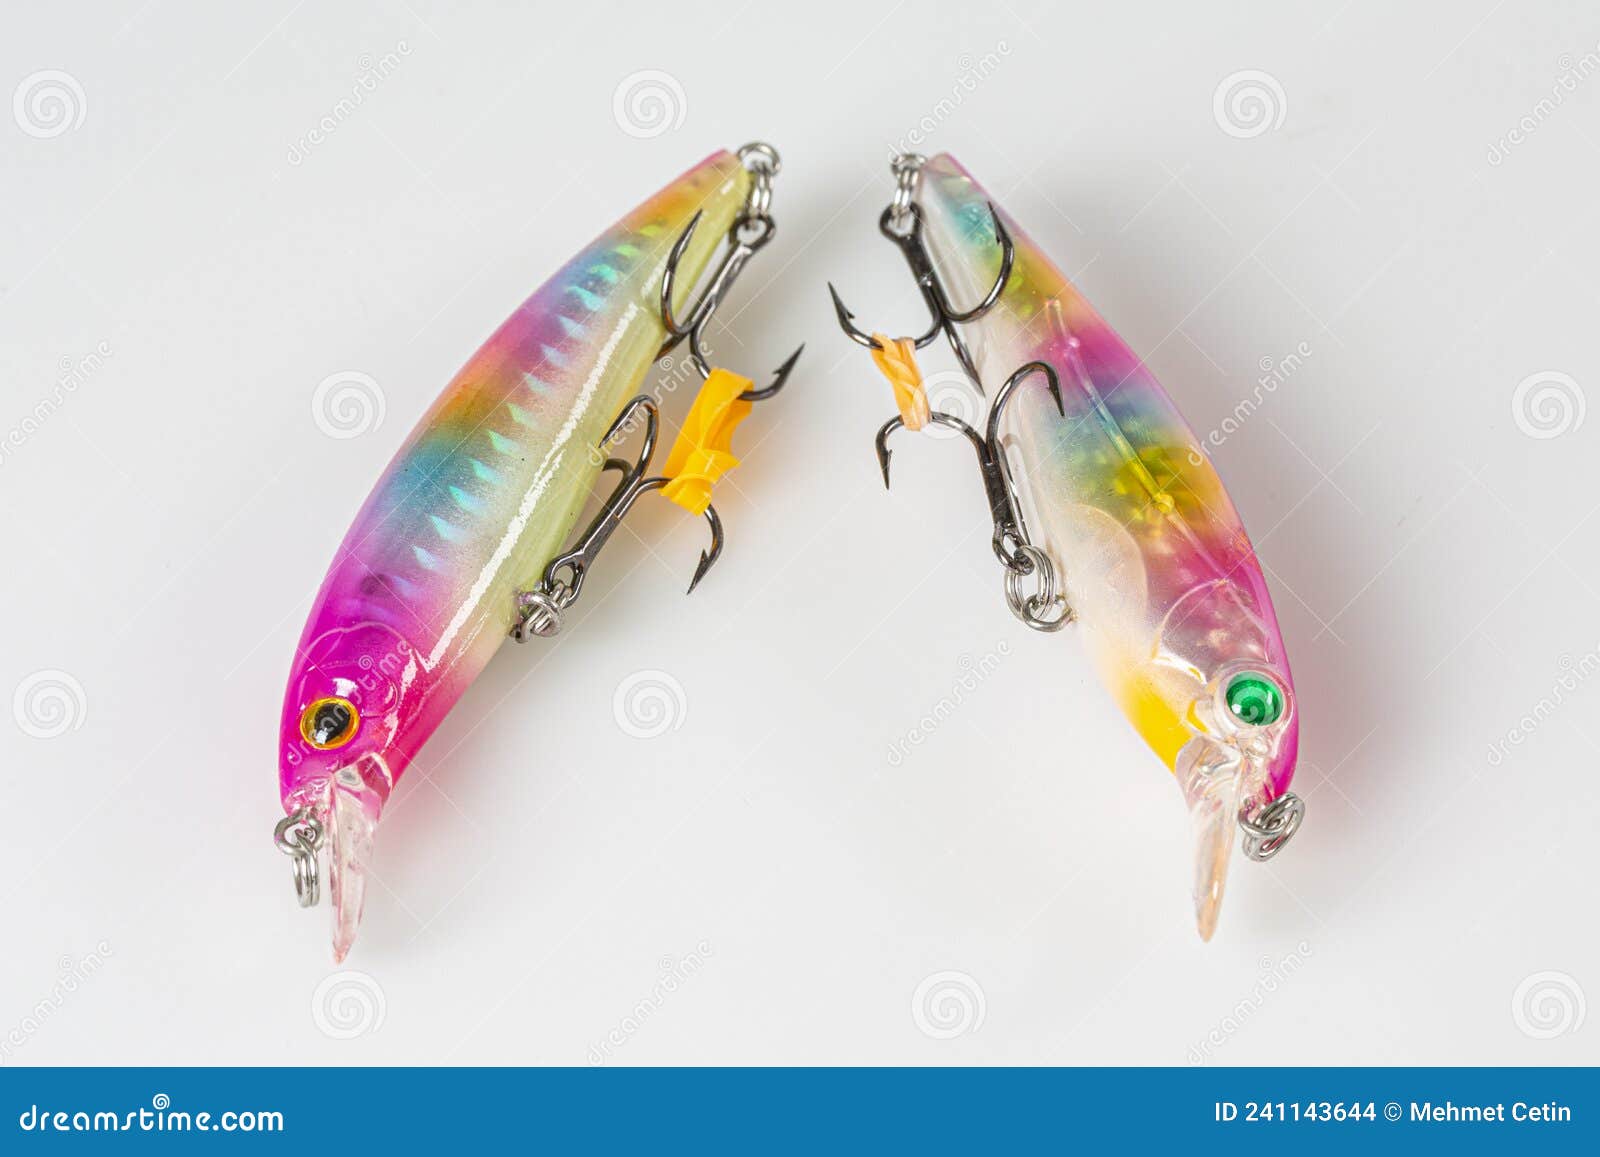 https://thumbs.dreamstime.com/z/fishing-lure-wobbler-temptations-white-background-many-spinning-fake-bait-artificial-colection-silicon-twister-hook-241143644.jpg